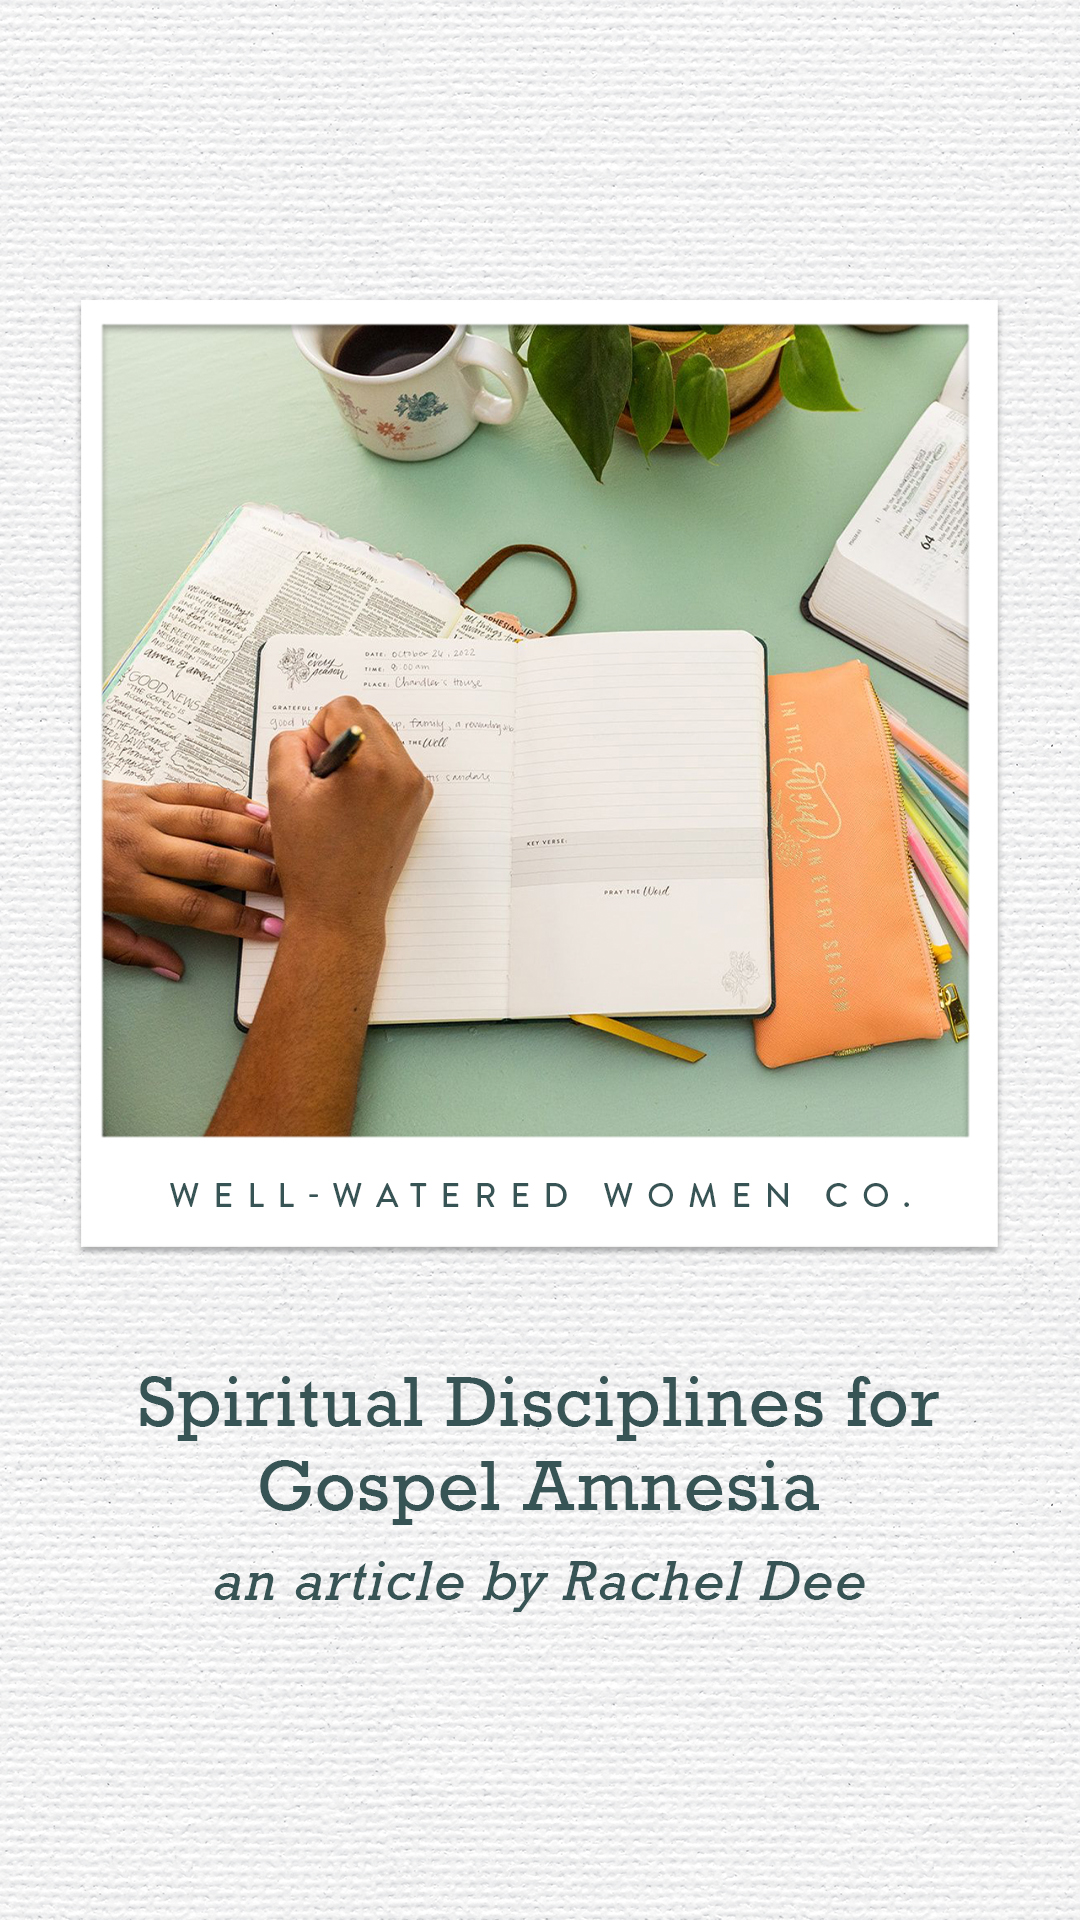 Spiritual Disciplines for Gospel Amnesia - an Article from Well - Watered Women